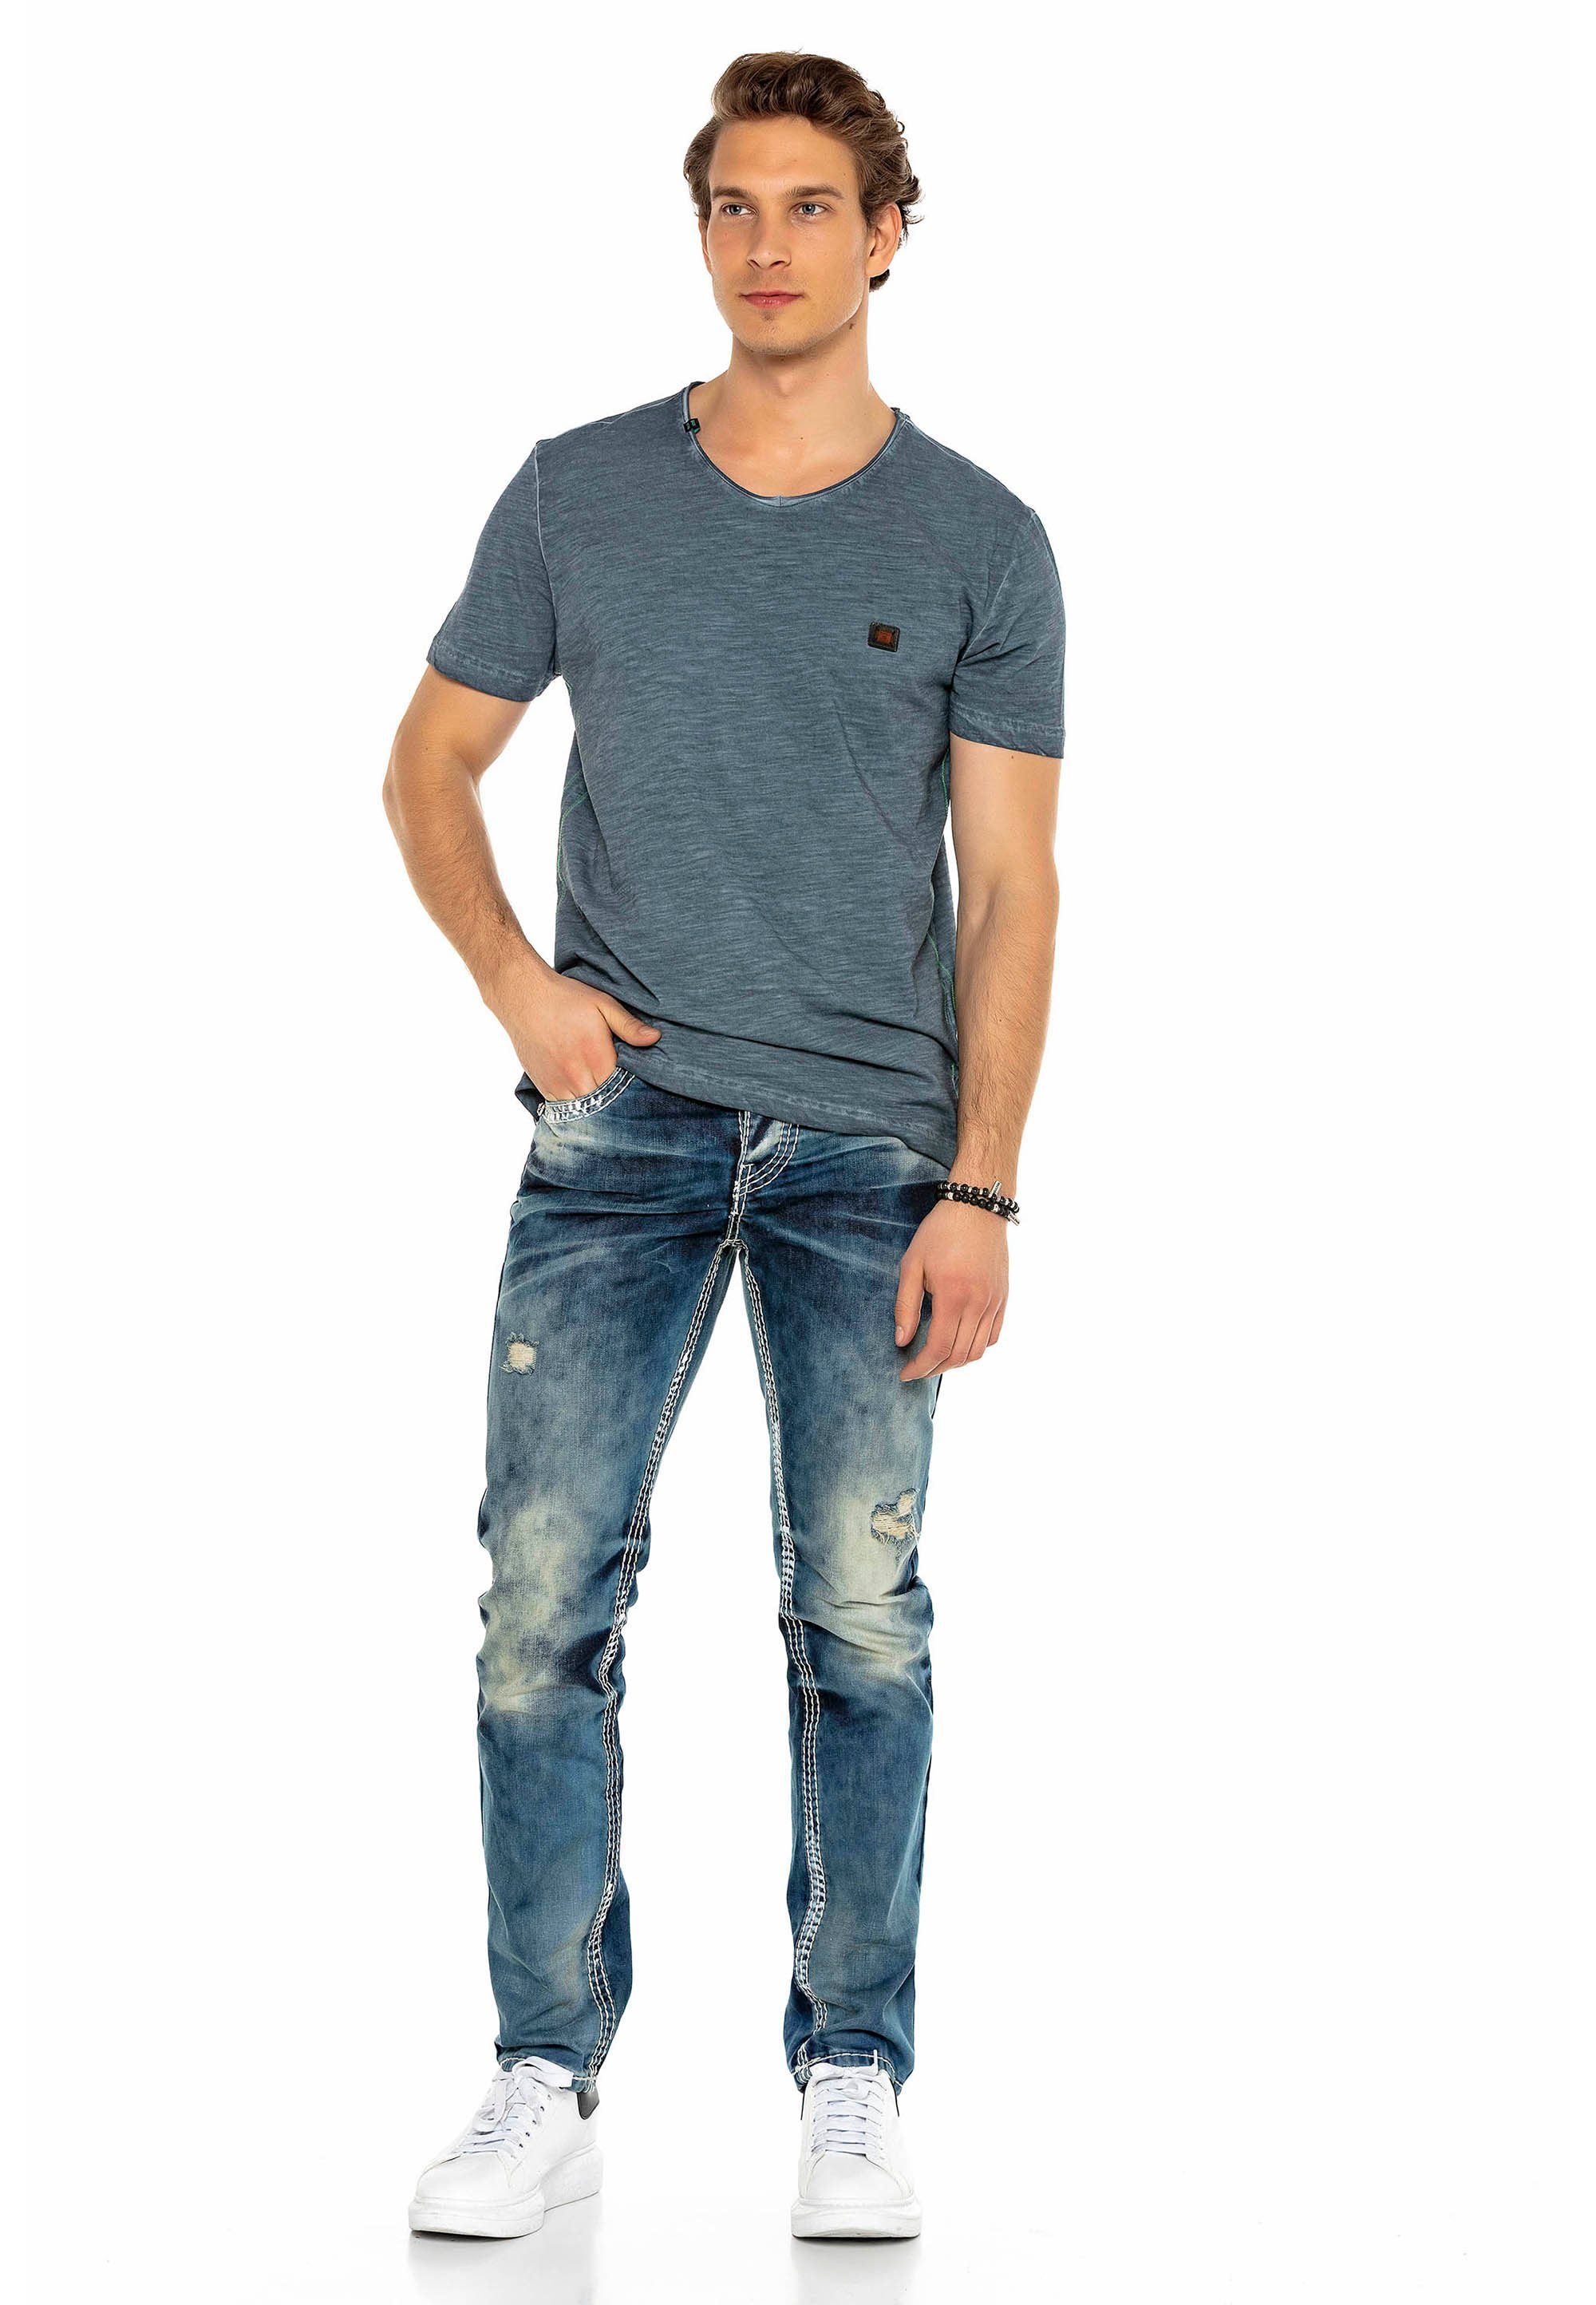 Cipo & Straight coolen Jeans Bequeme Used-Look Baxx Fit im